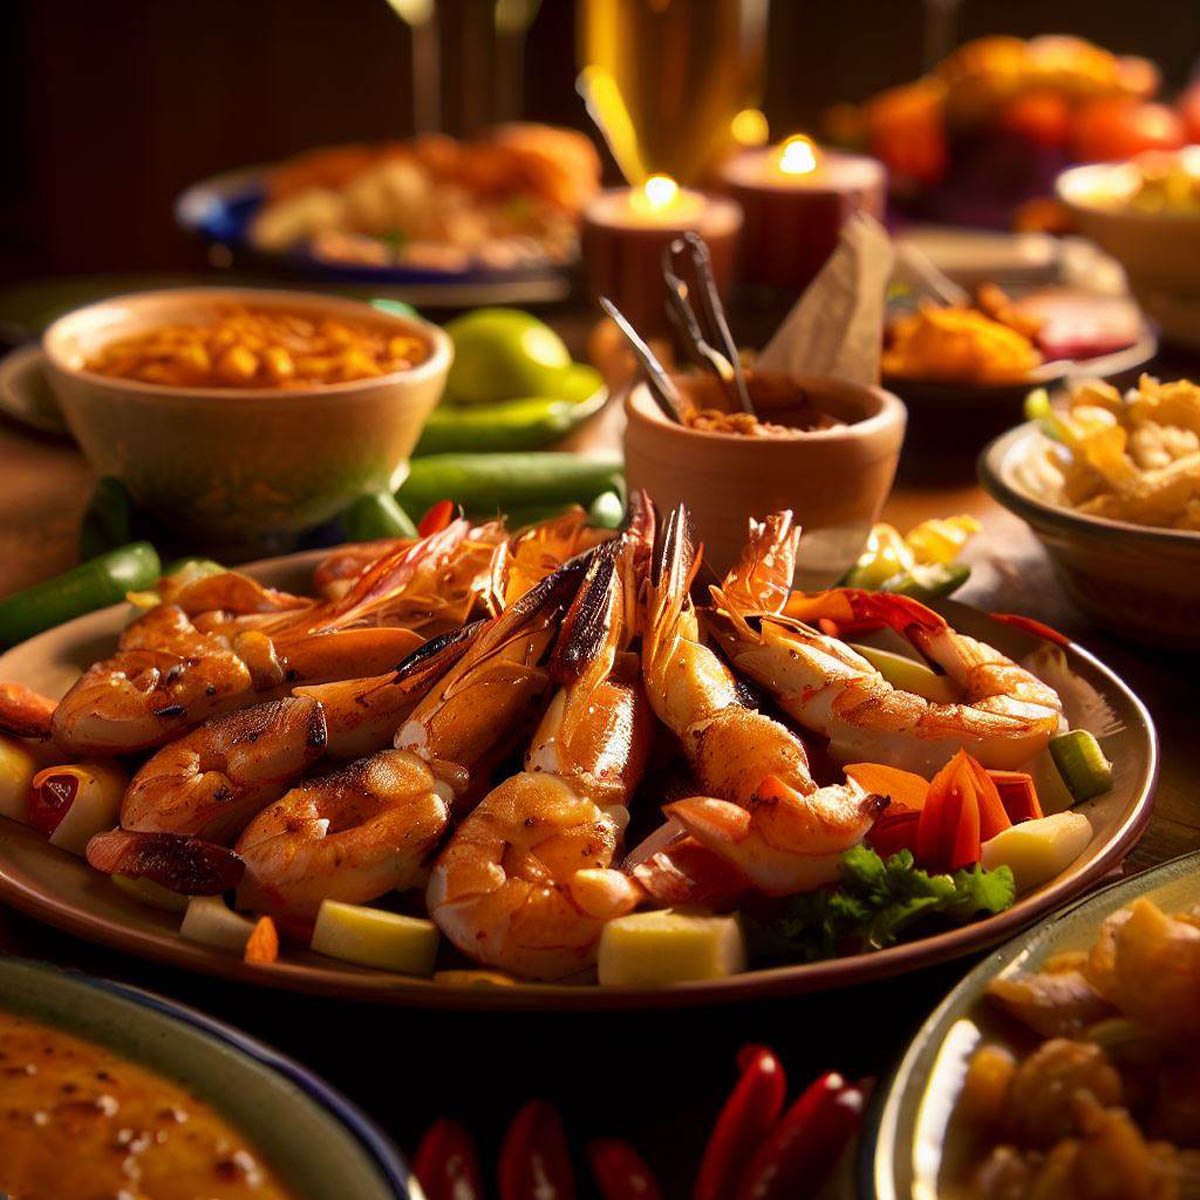 Texas Roadhouse grilled shrimp skewers served as the main course at a dinner party